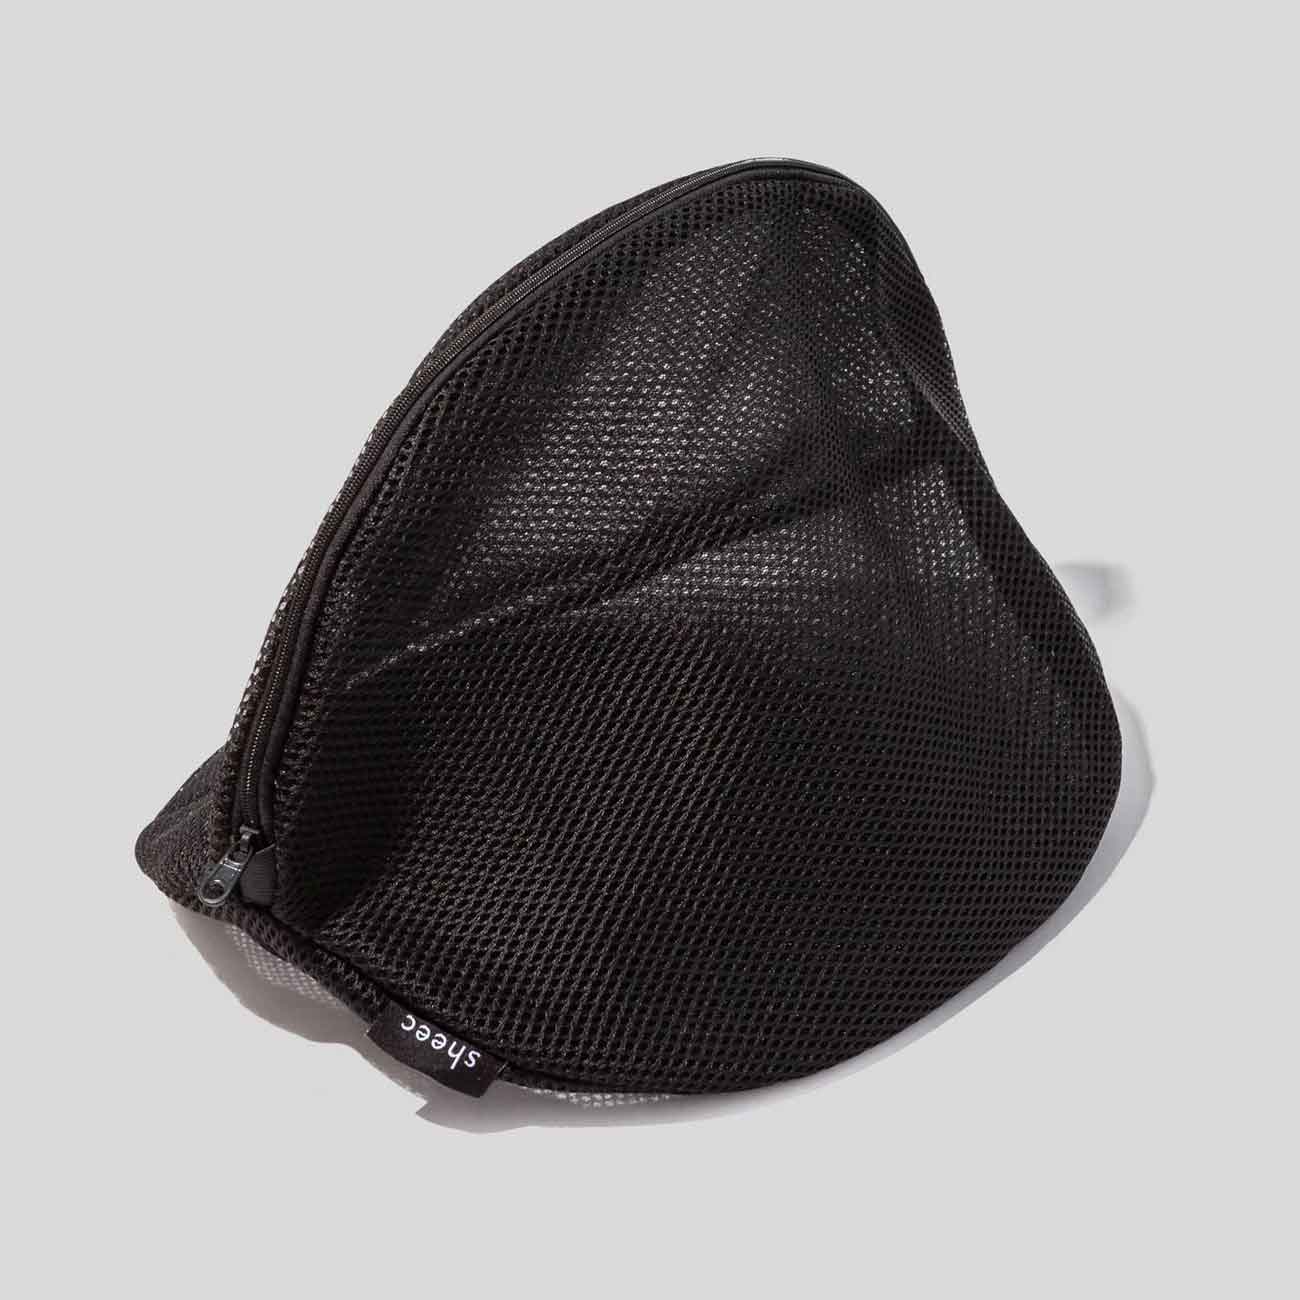 Laundry mesh bag for Shoes